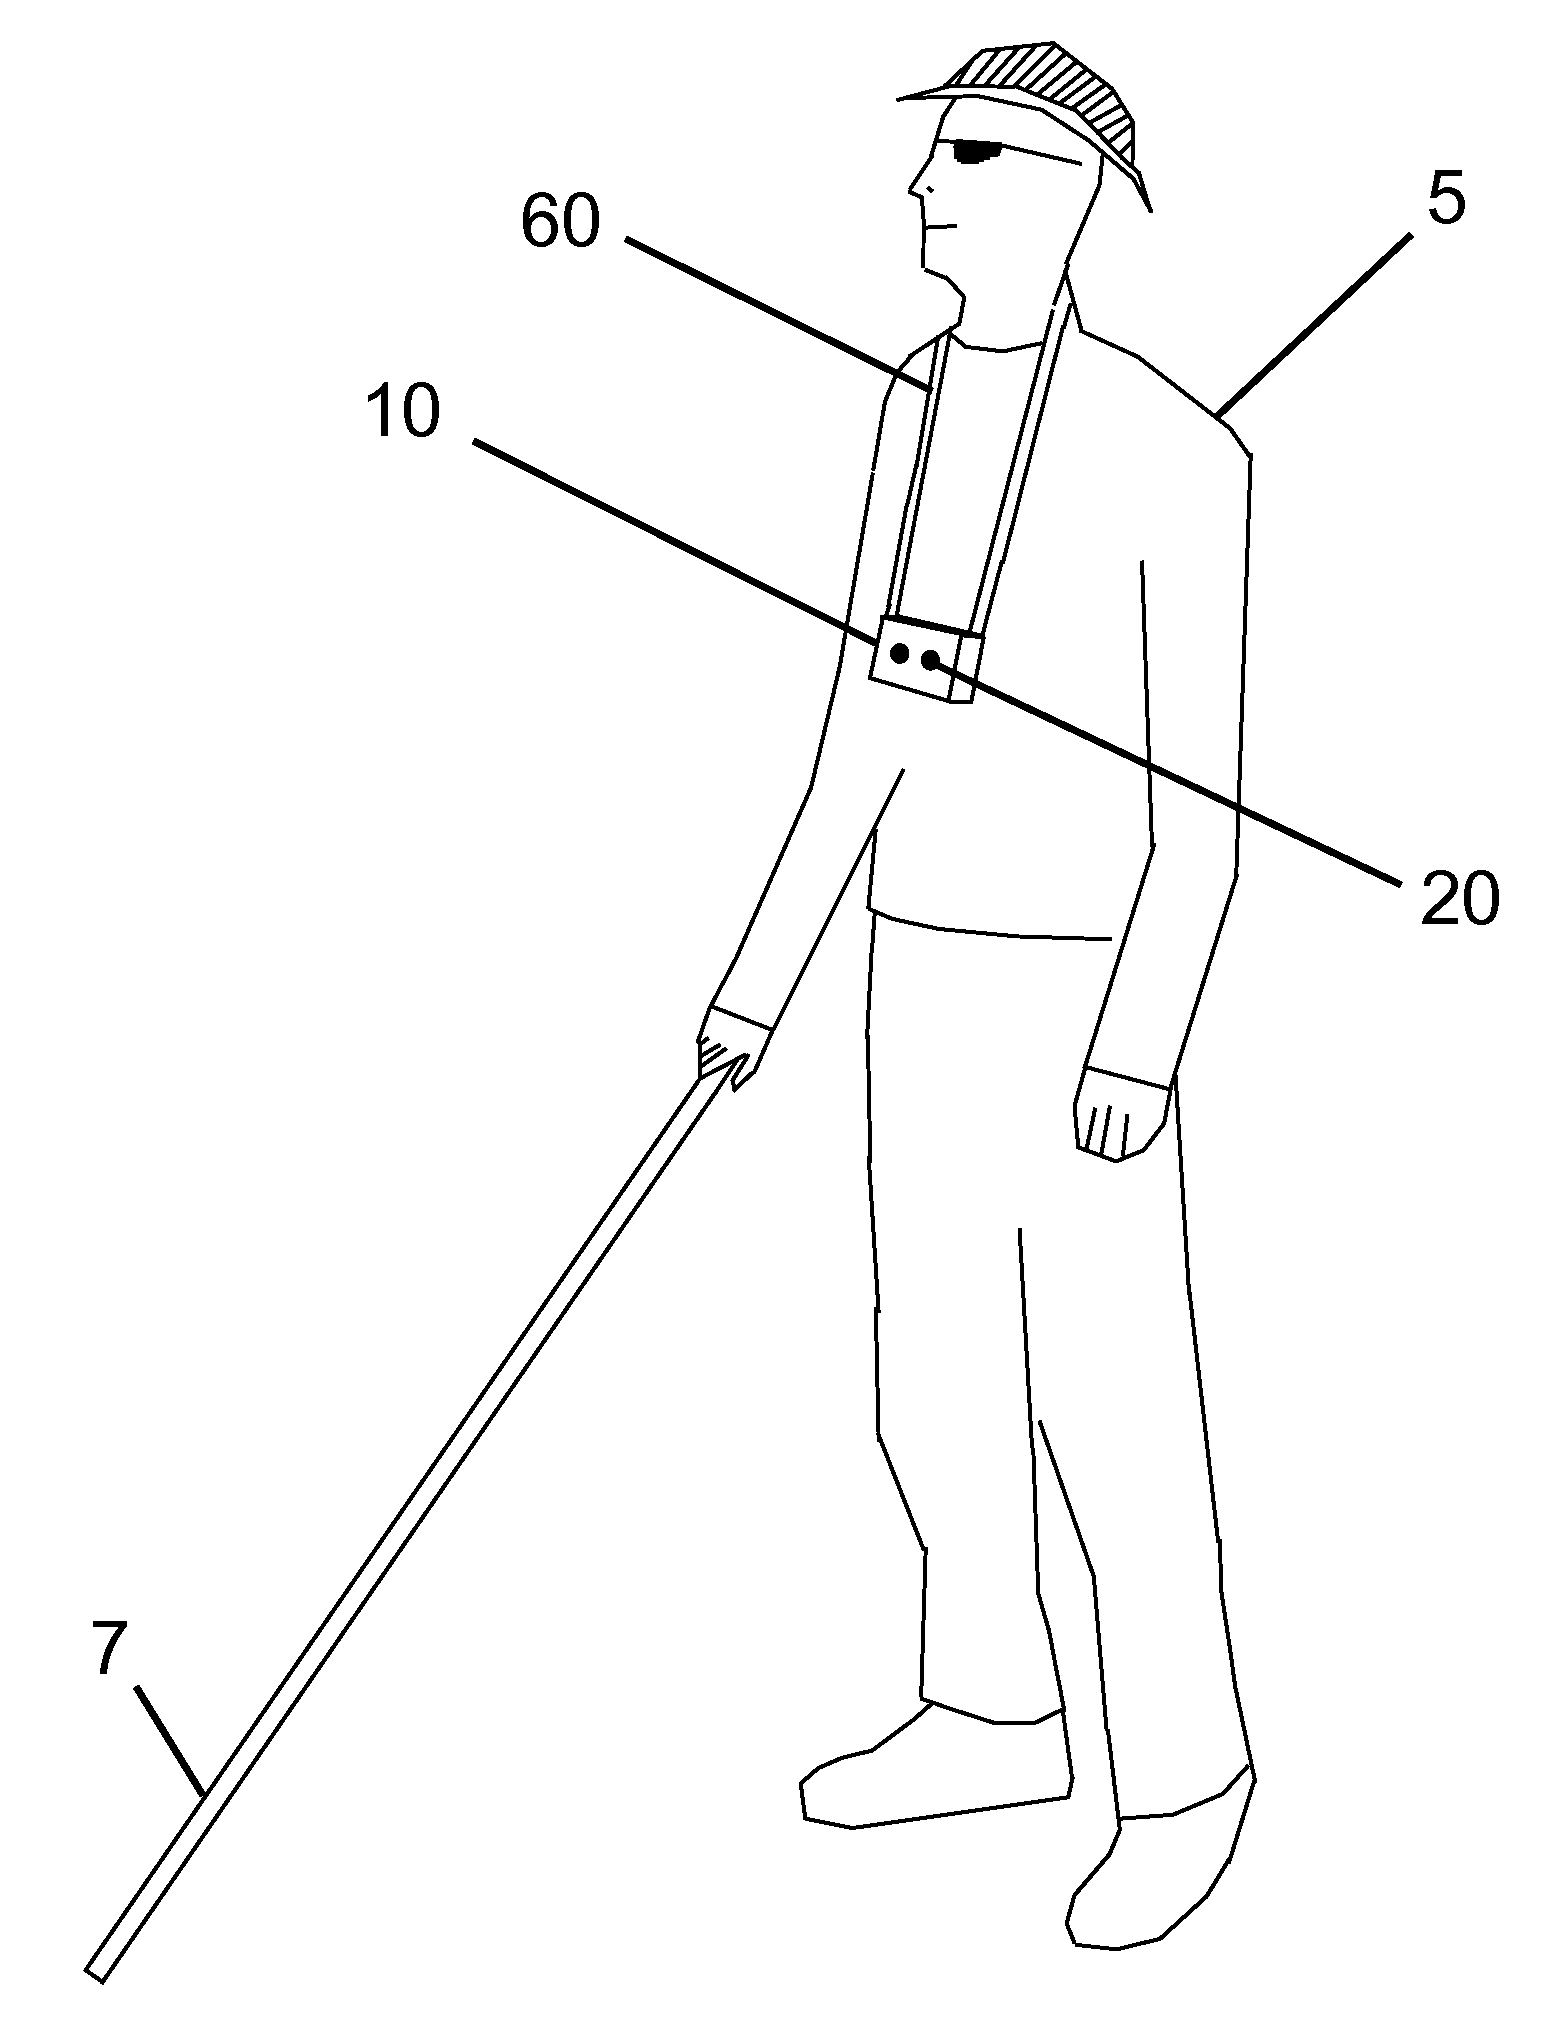 System and method for alerting visually impaired users of nearby objects